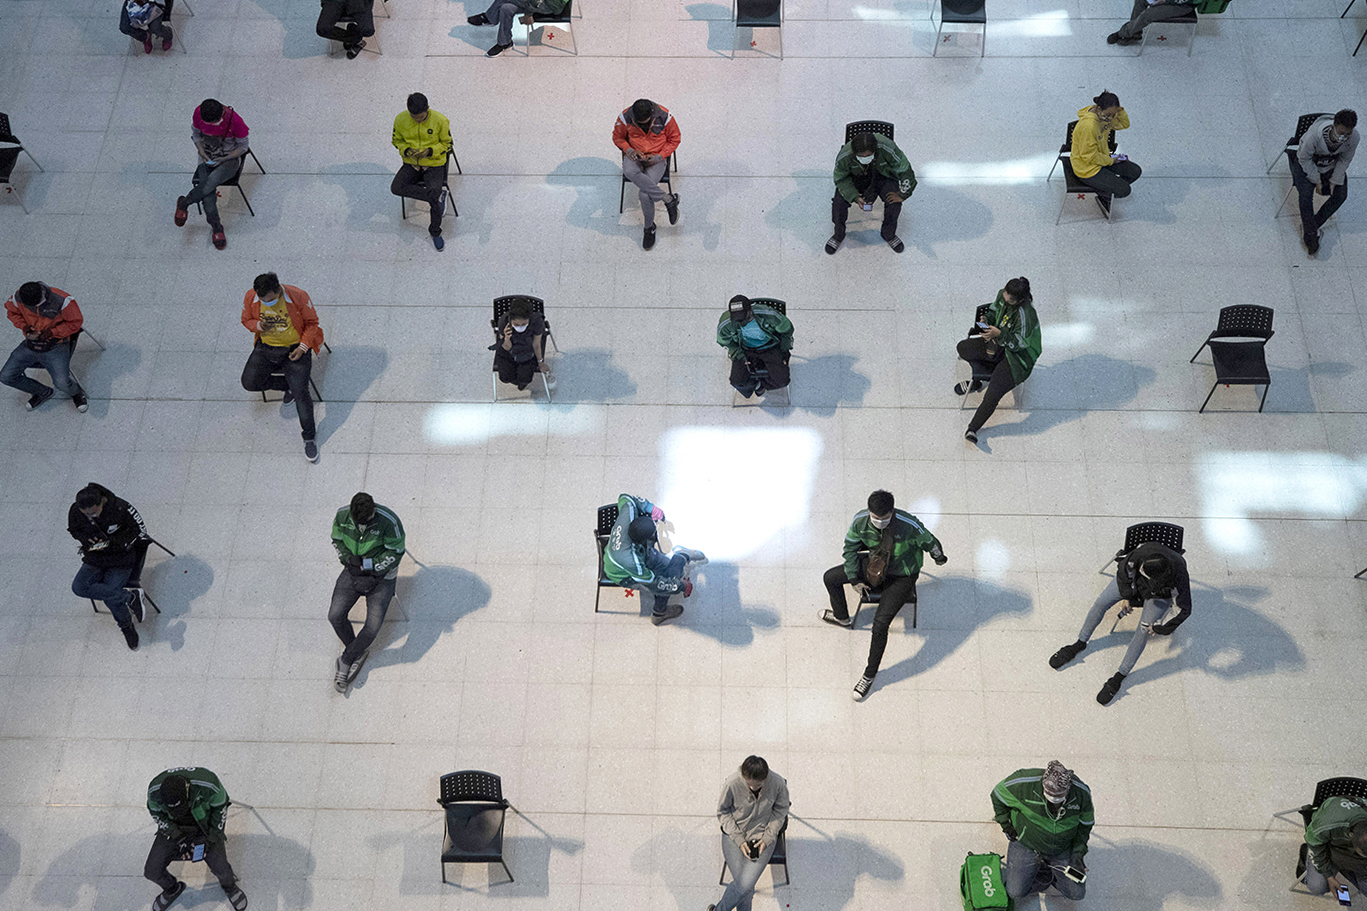 Shot of shoppers on spread-out chairs to prevent coronavirus spread